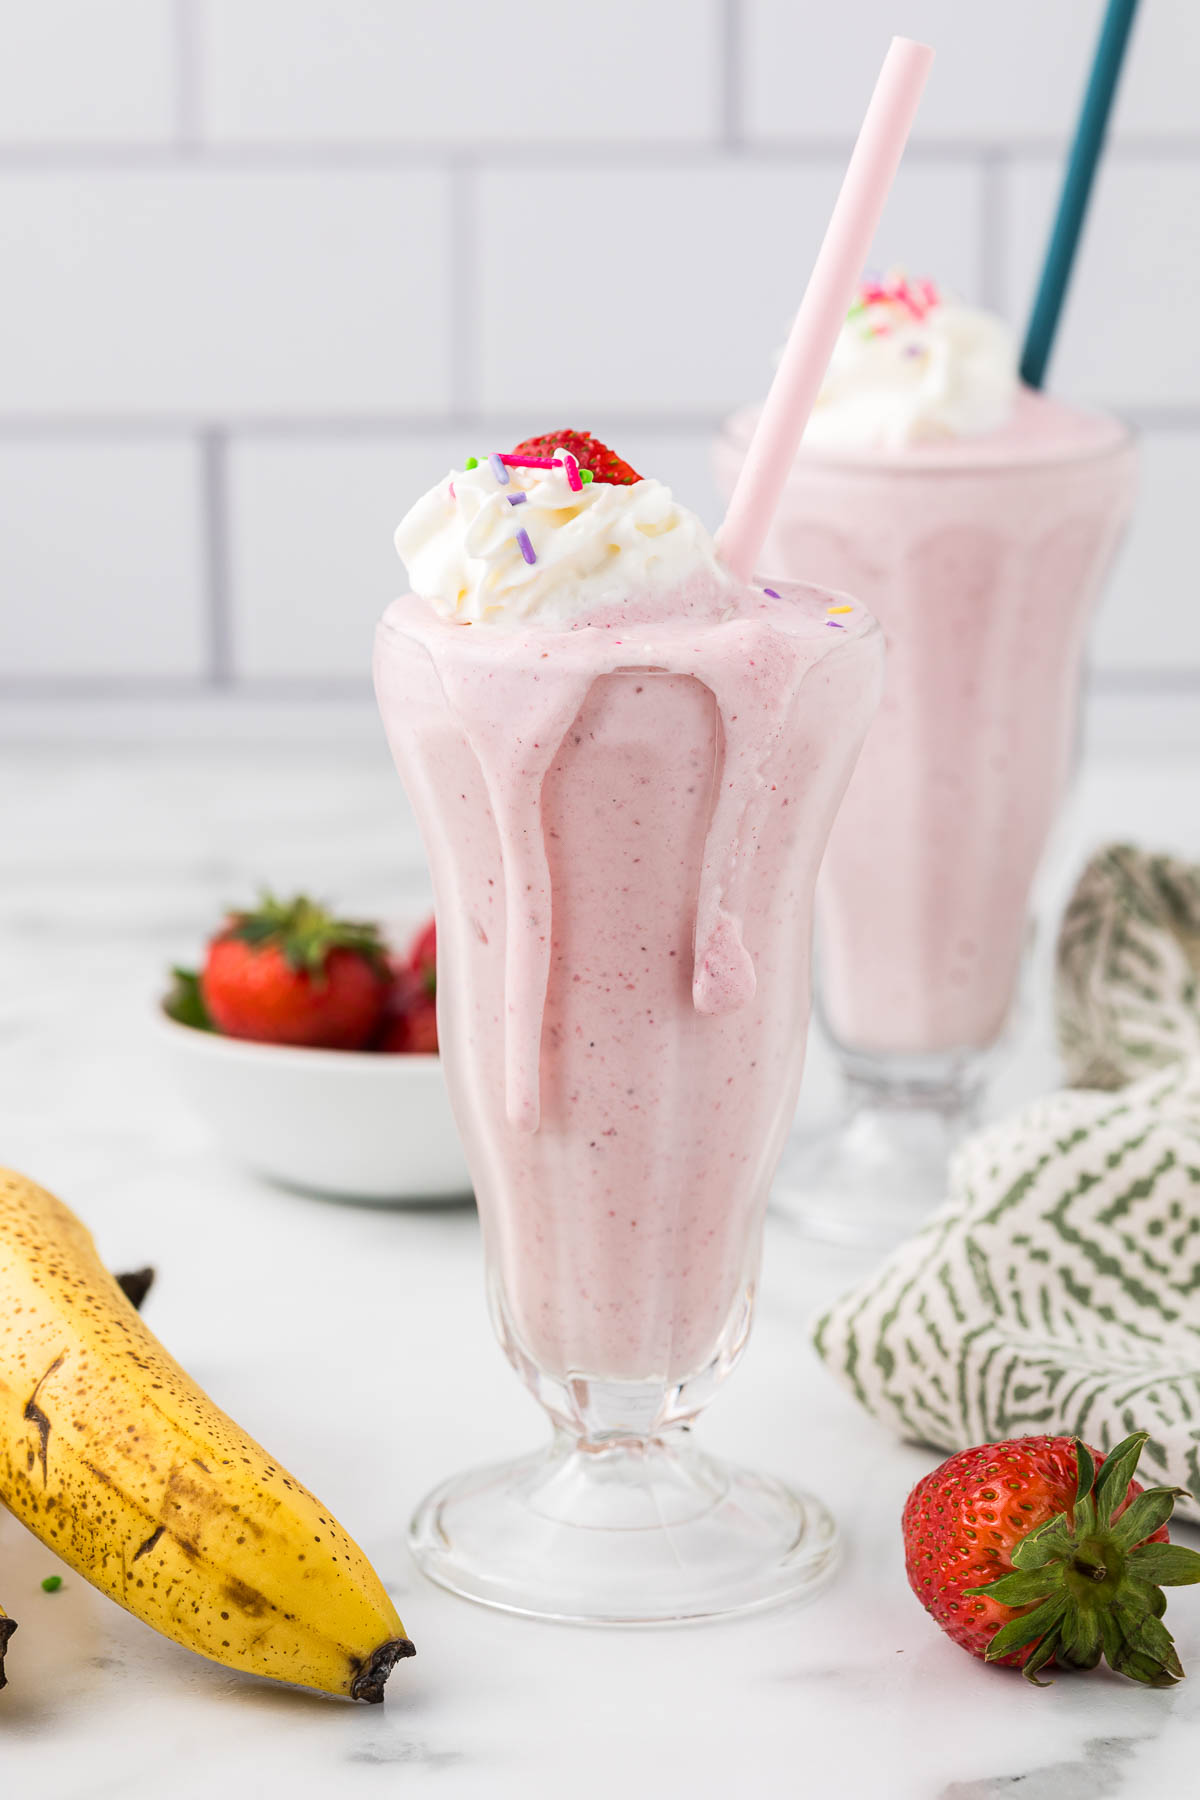 Two Strawberry Banana Milkshakes with whipped topping, sprinkles and a strawberry. 